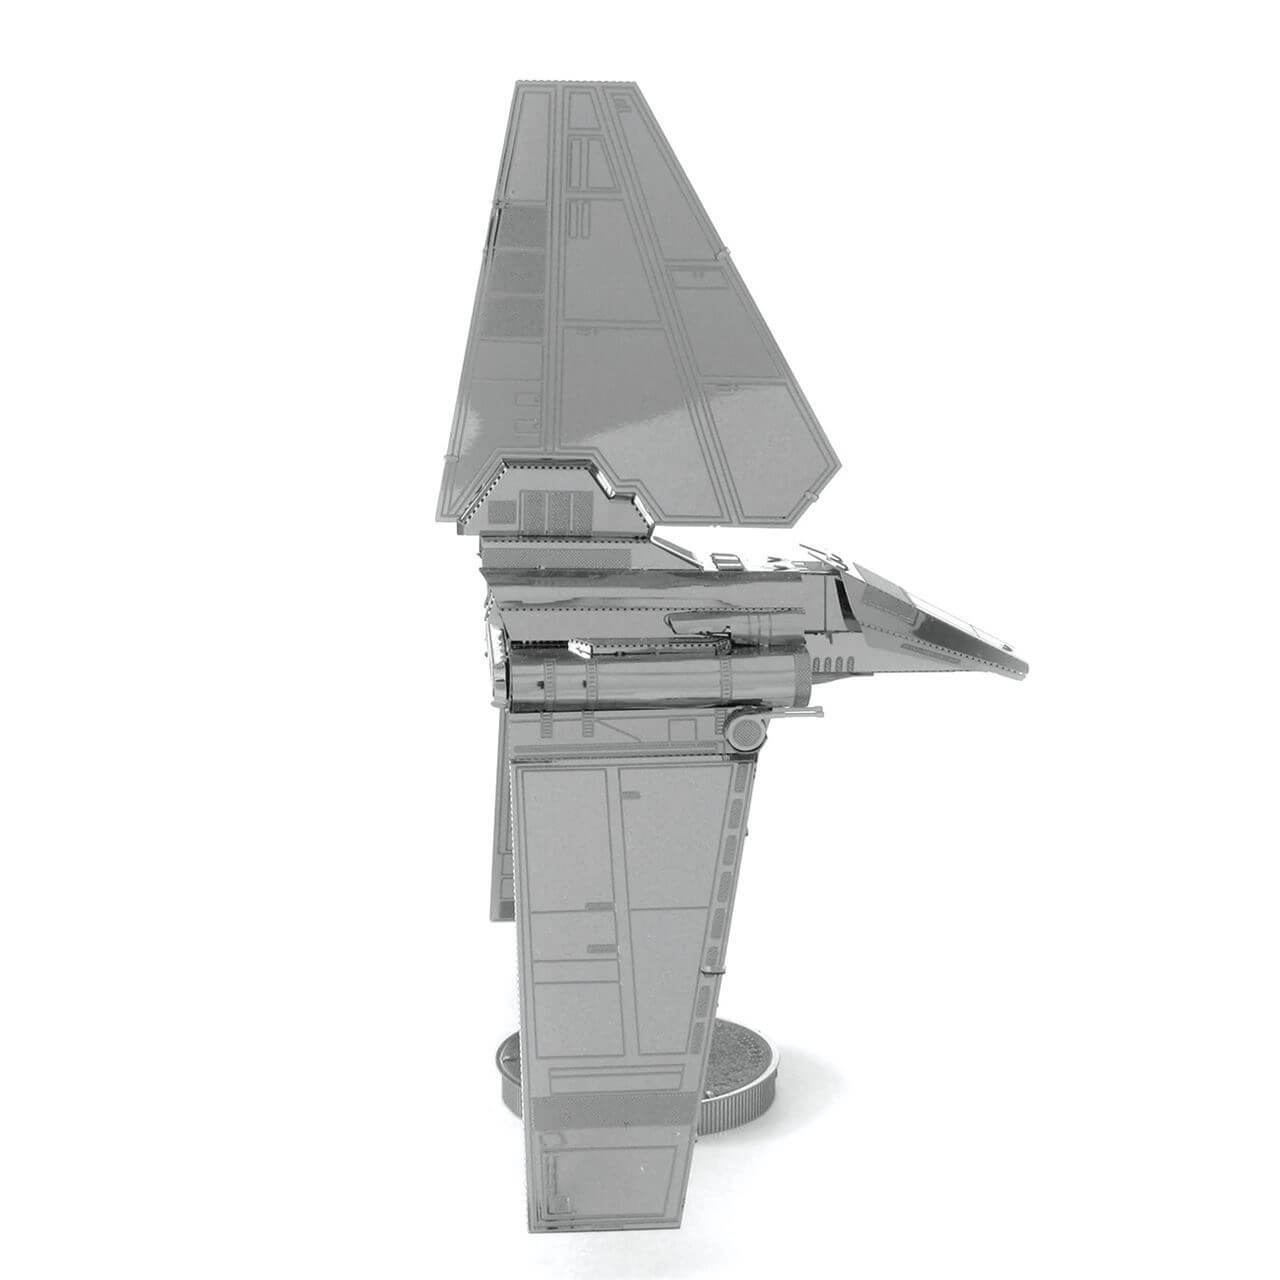 Side view of the metal model.